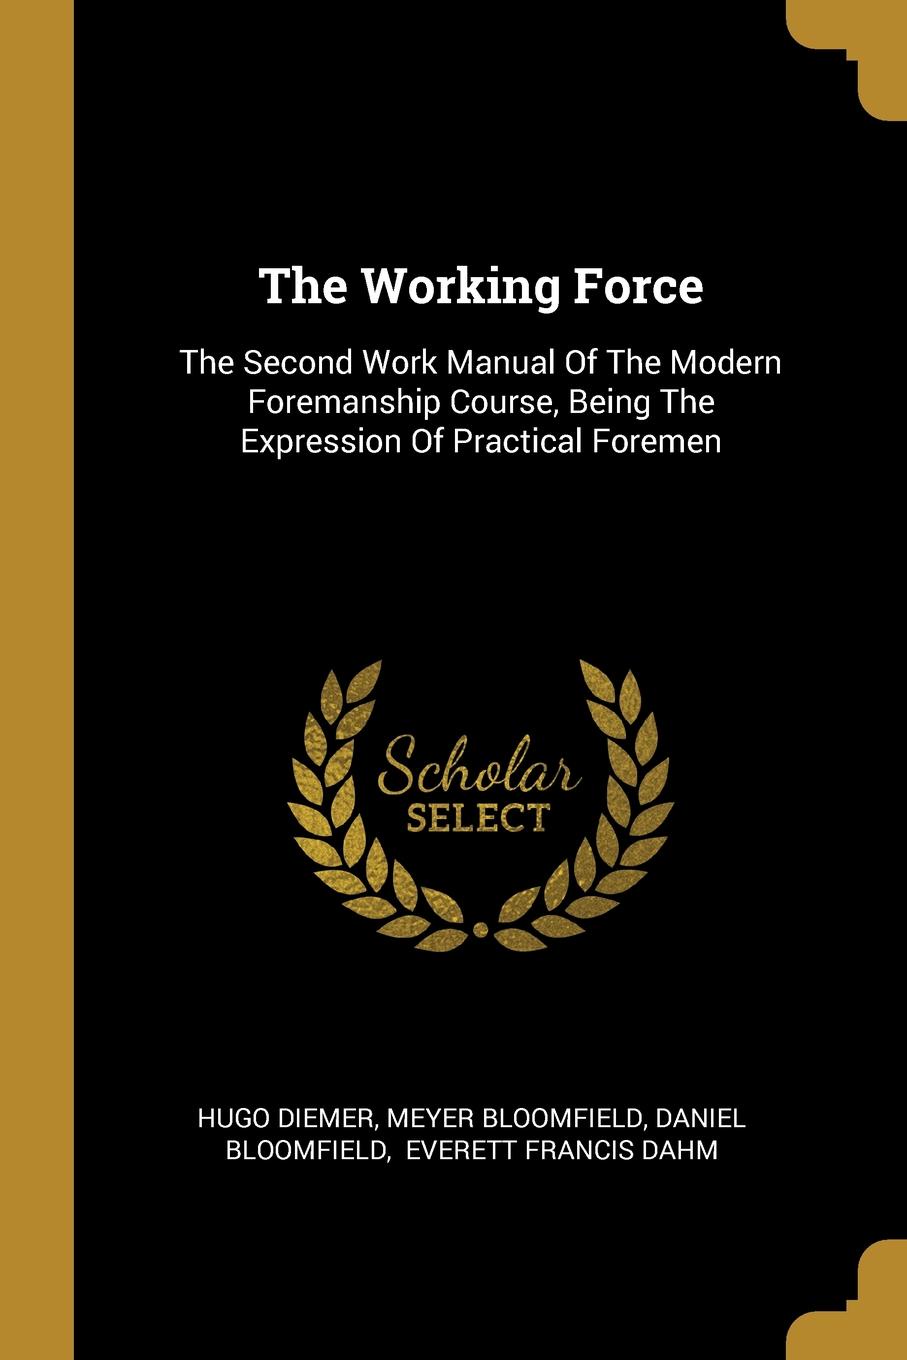 The Working Force. The Second Work Manual Of The Modern Foremanship Course, Being The Expression Of Practical Foremen